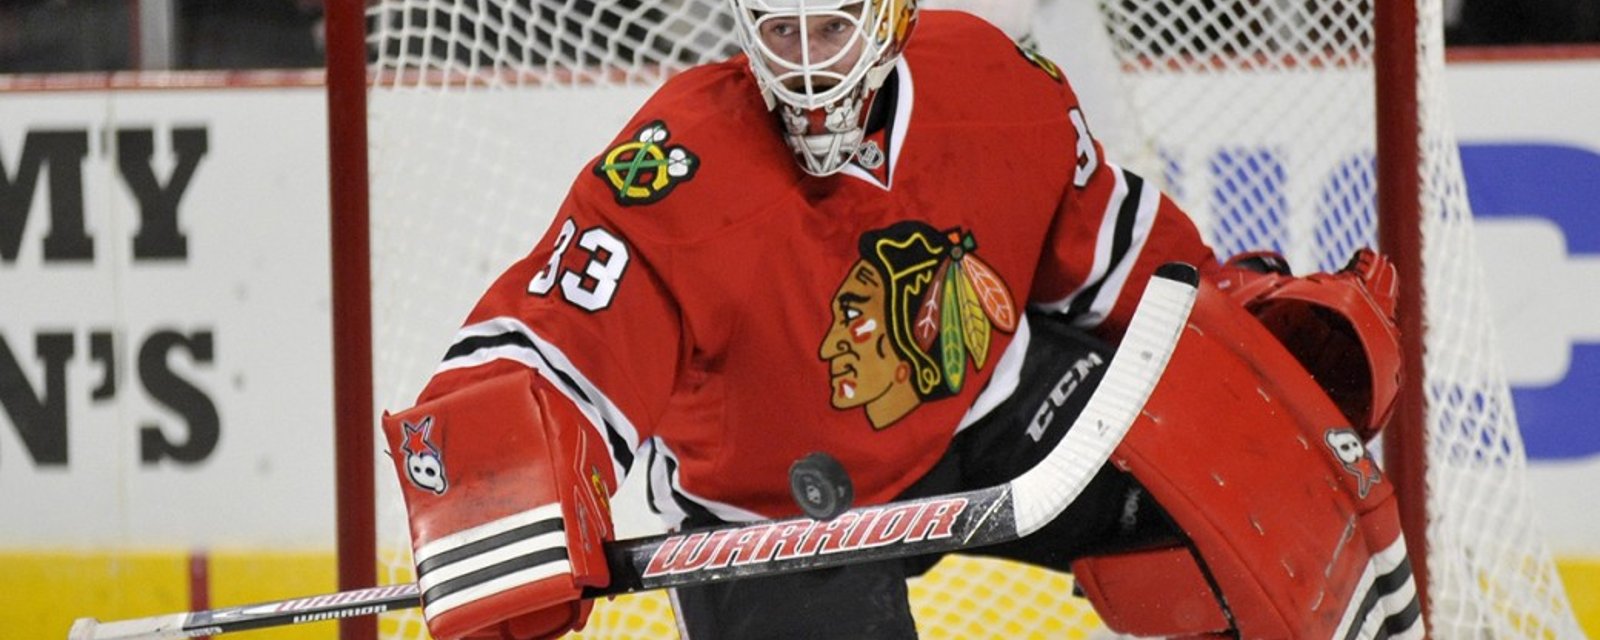 Scott Darling's Special Edition Winter Classic Mask